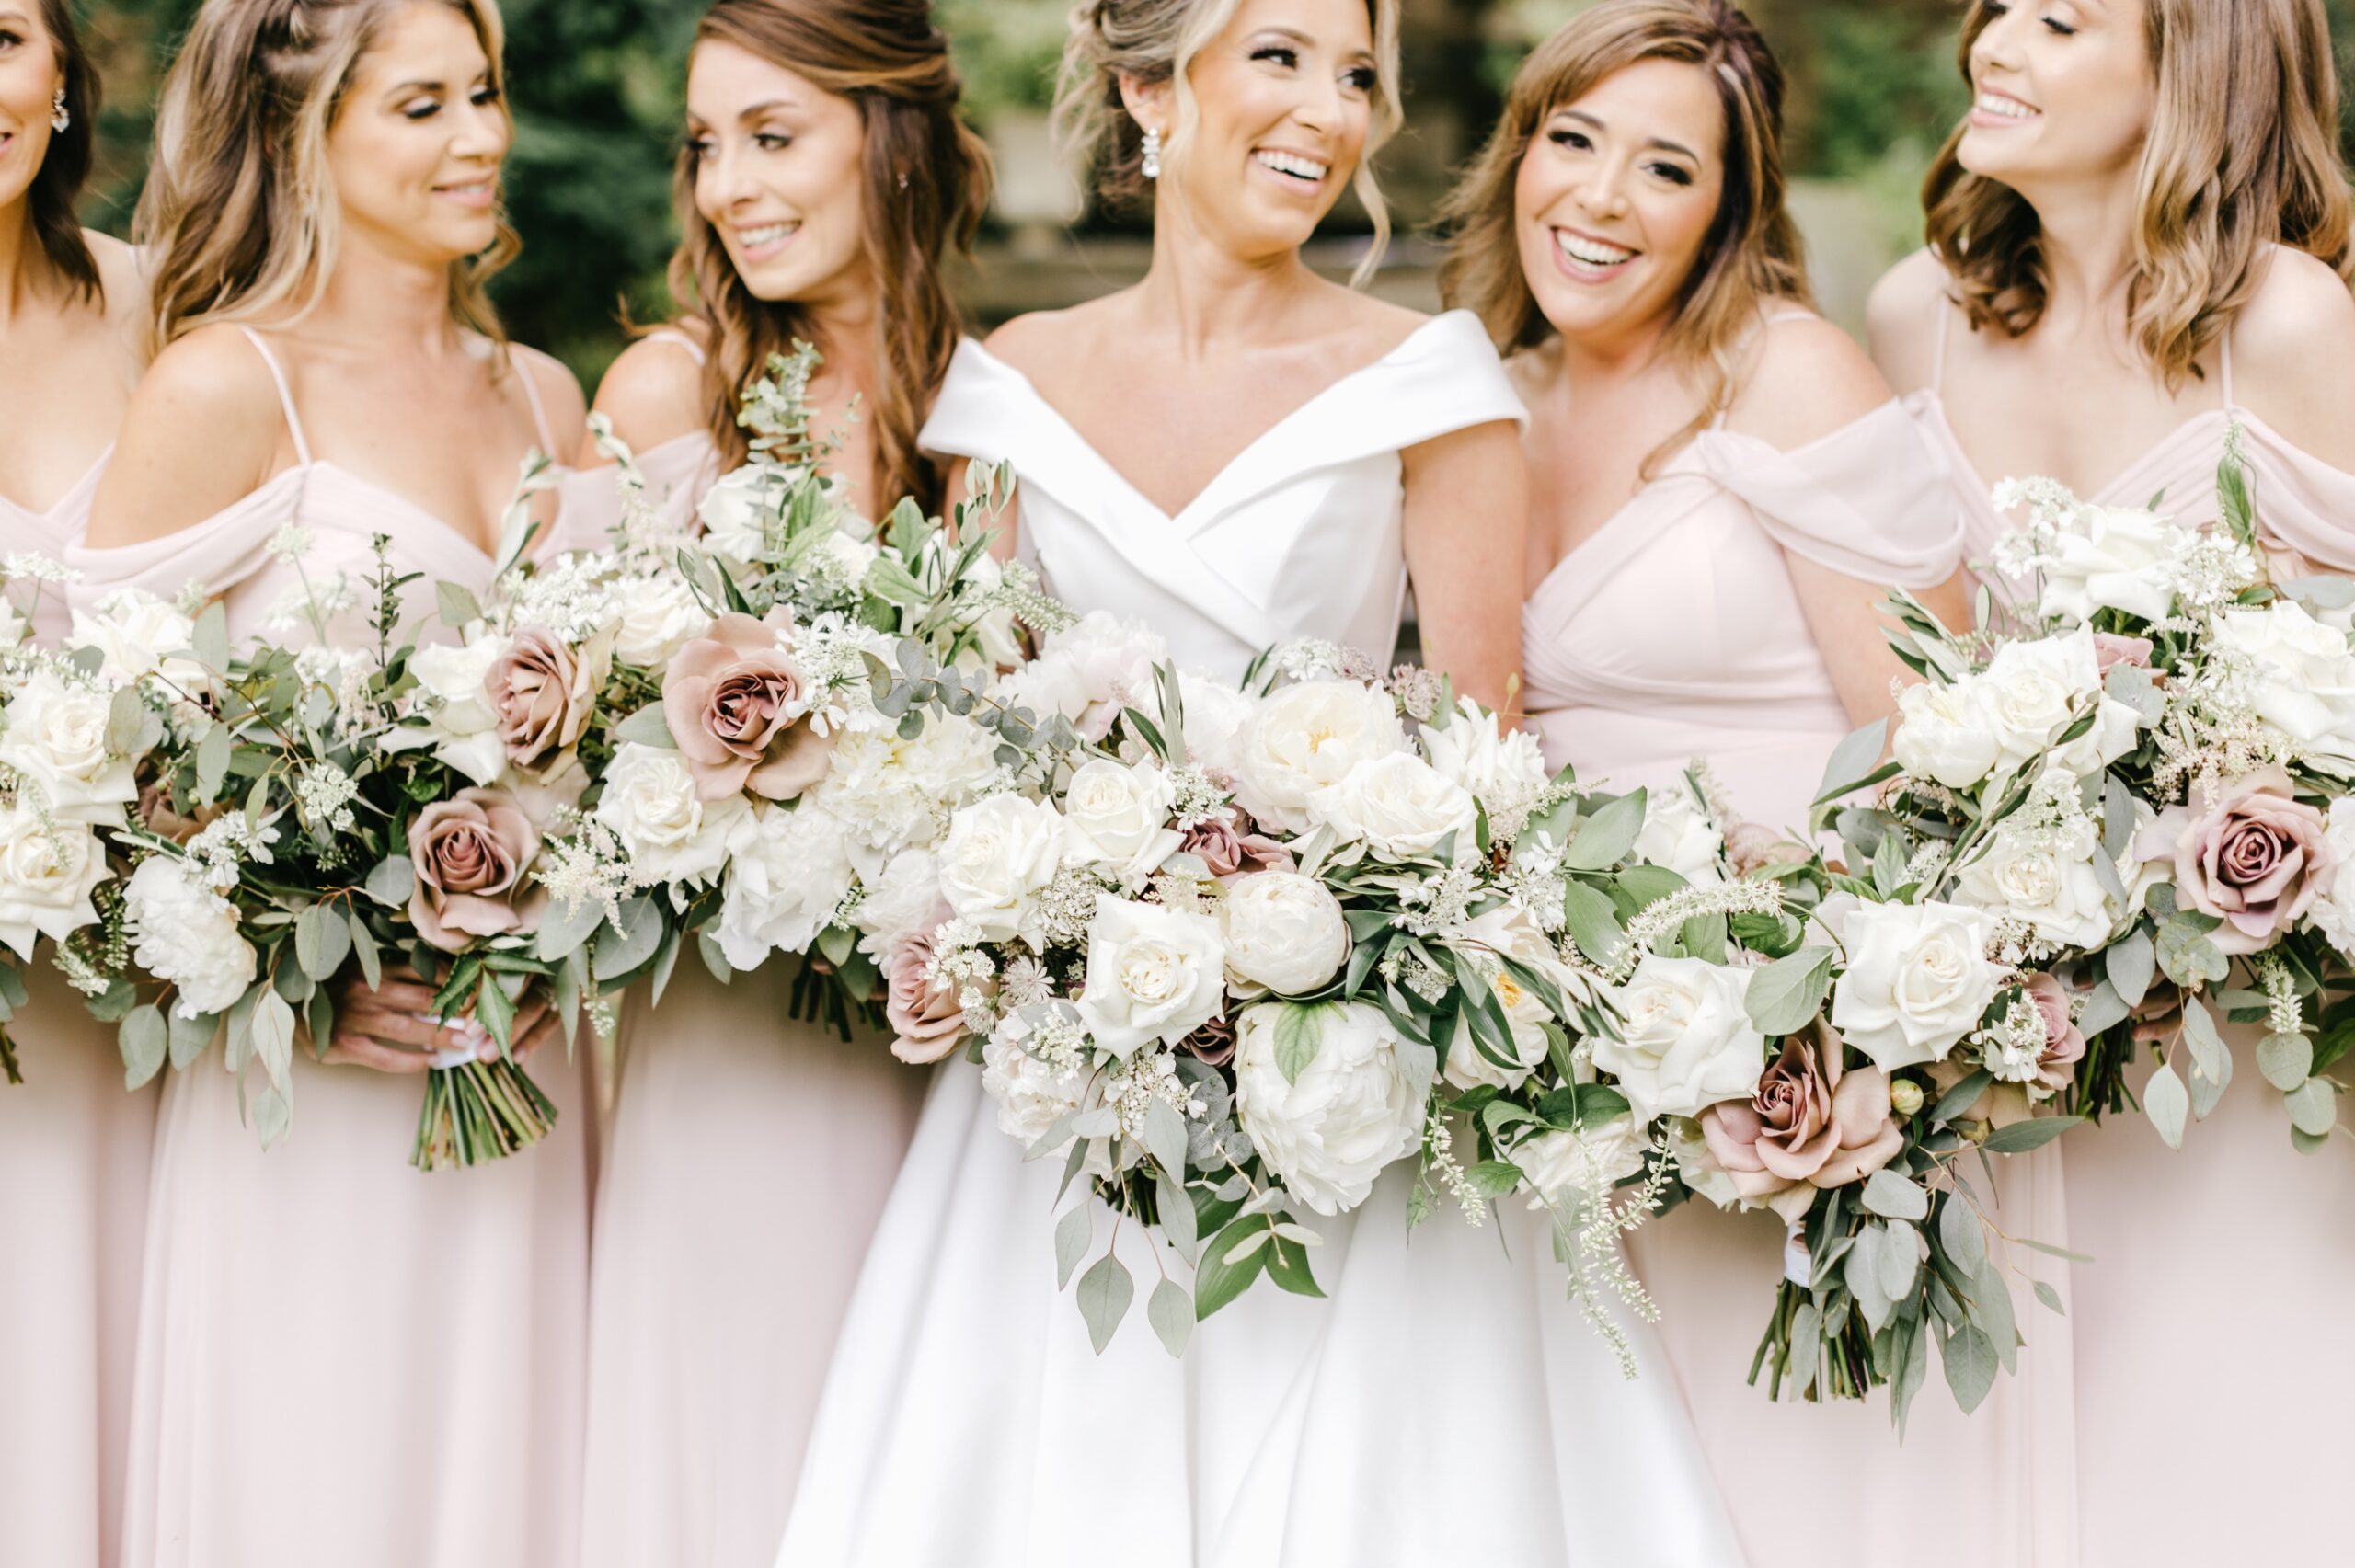 Bride and bridesmaids in blush dresses laughing together